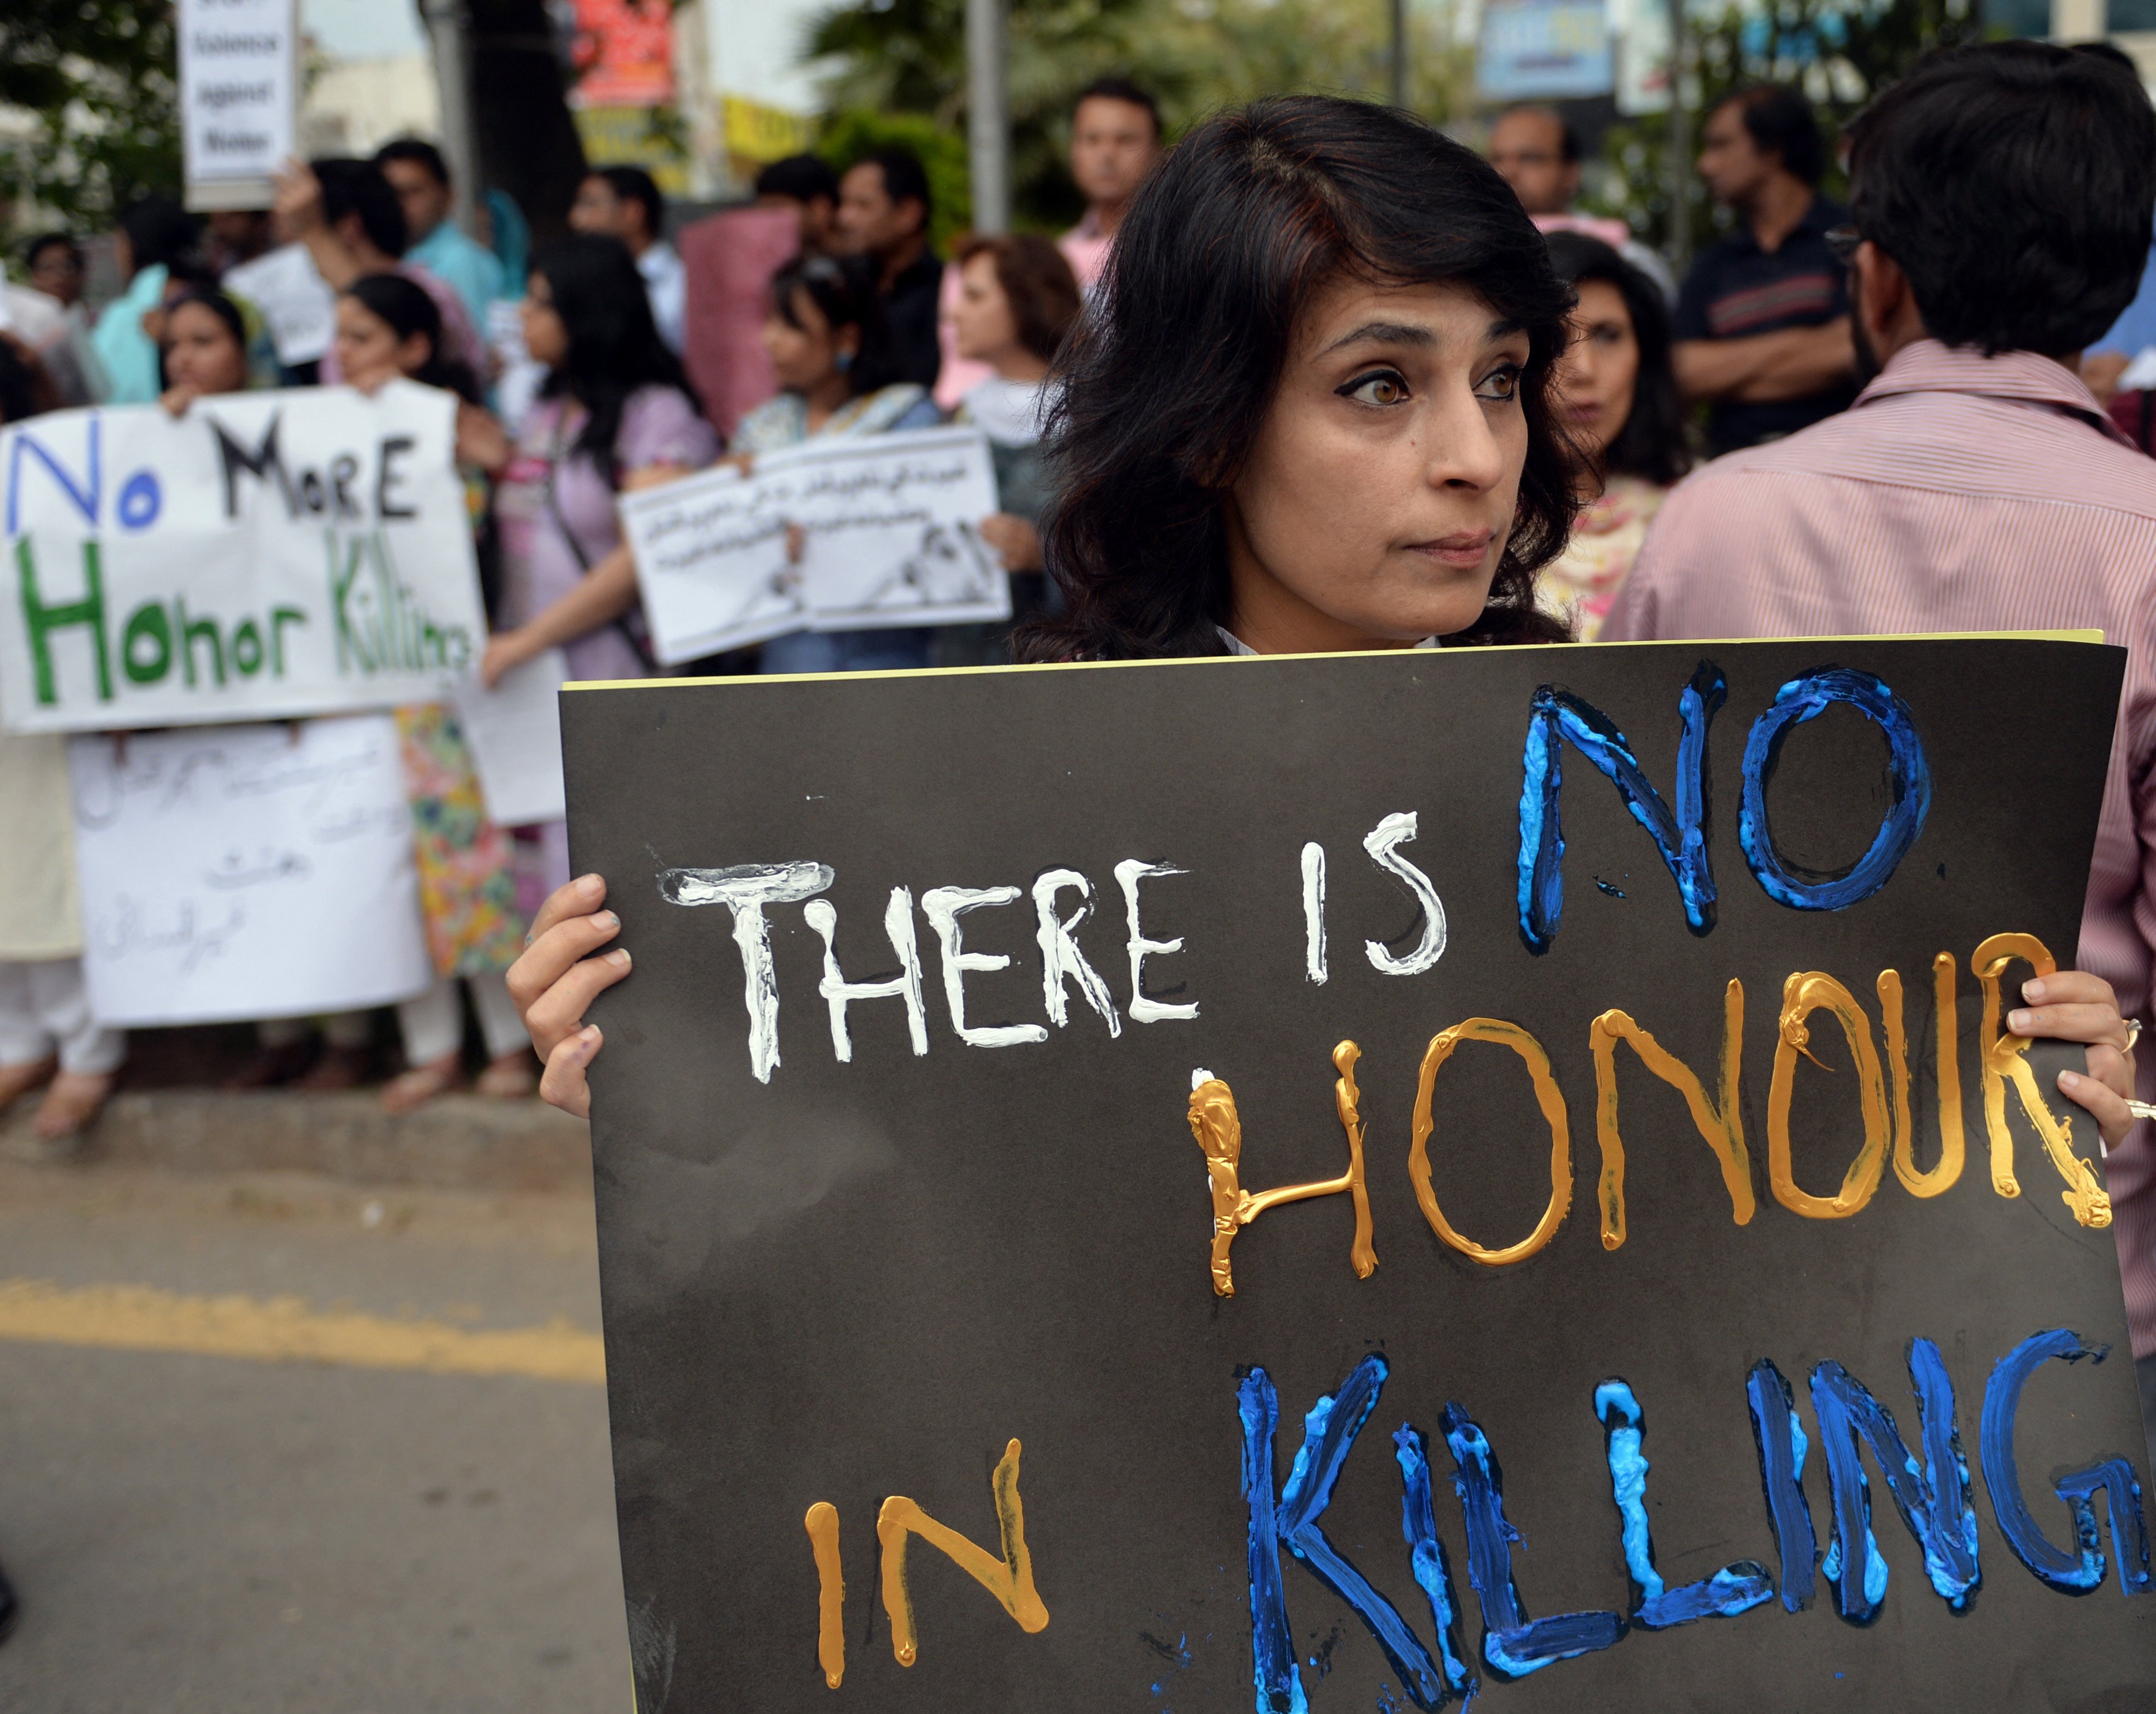 Pakistani activists hold placards during a protest in Islamabad on May 29, 2014. File photo: AFP